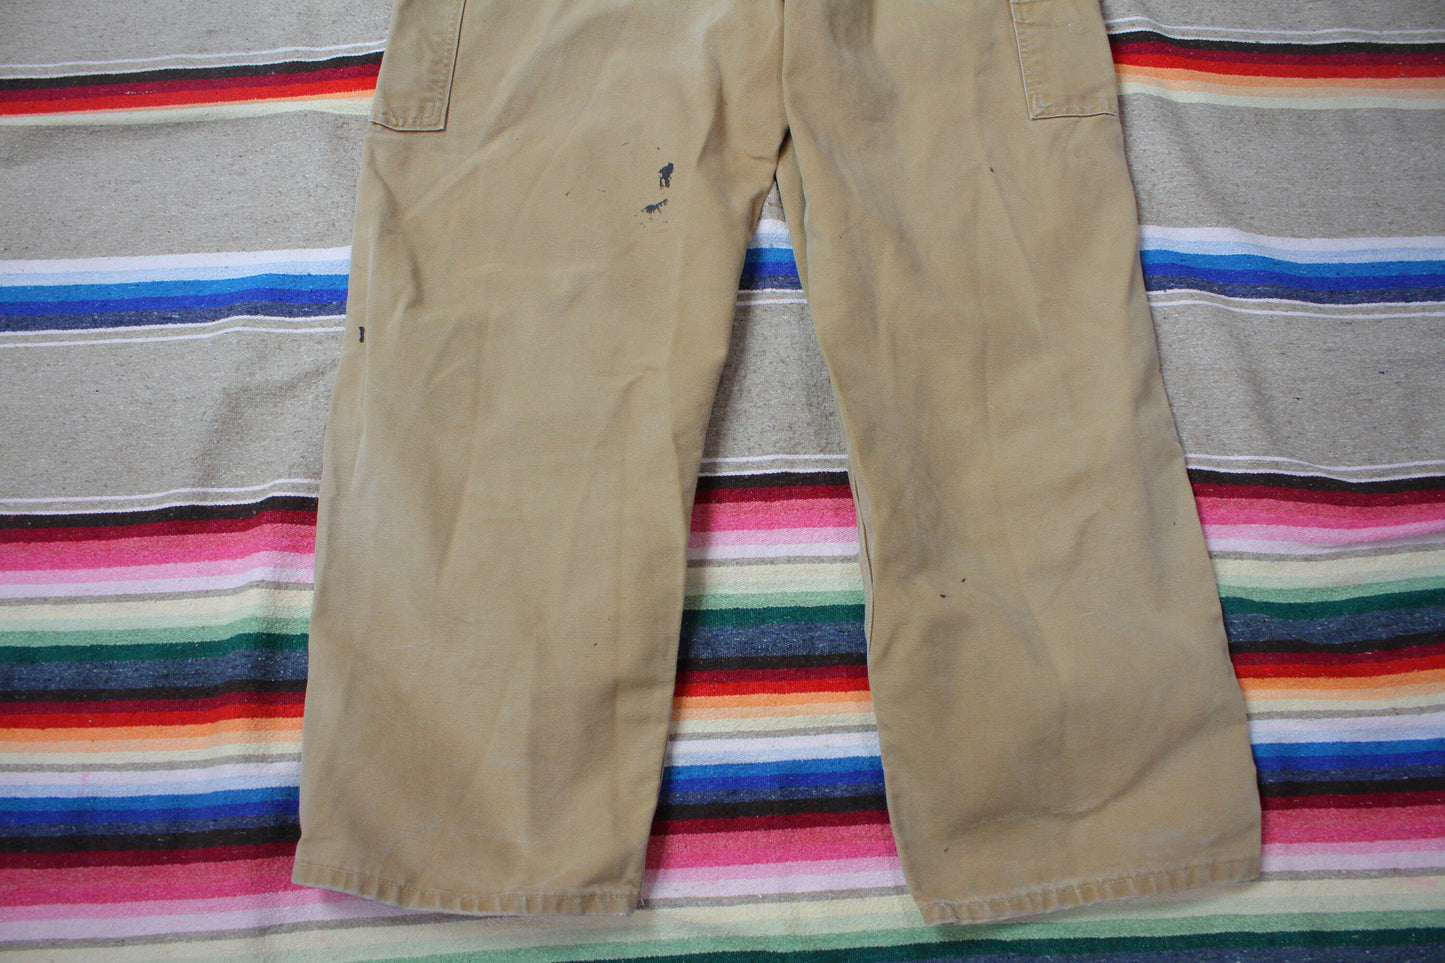 2010s Carharrt Double Knee Overalls Made in USA Size 44x30